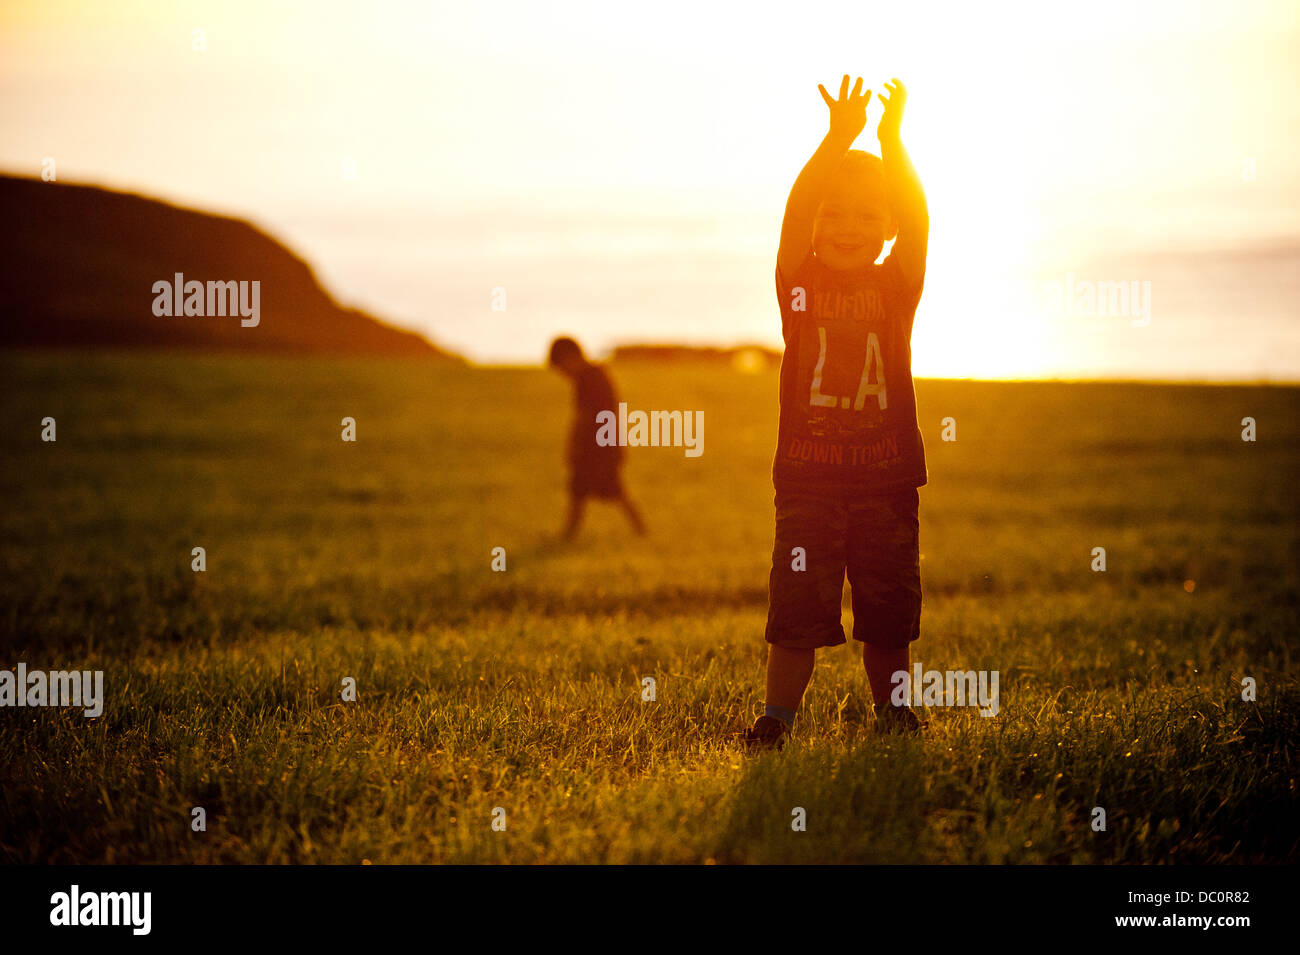 Children jumping and playing in front of a setting sun near St Davids, Pembrokeshire, Stock Photo